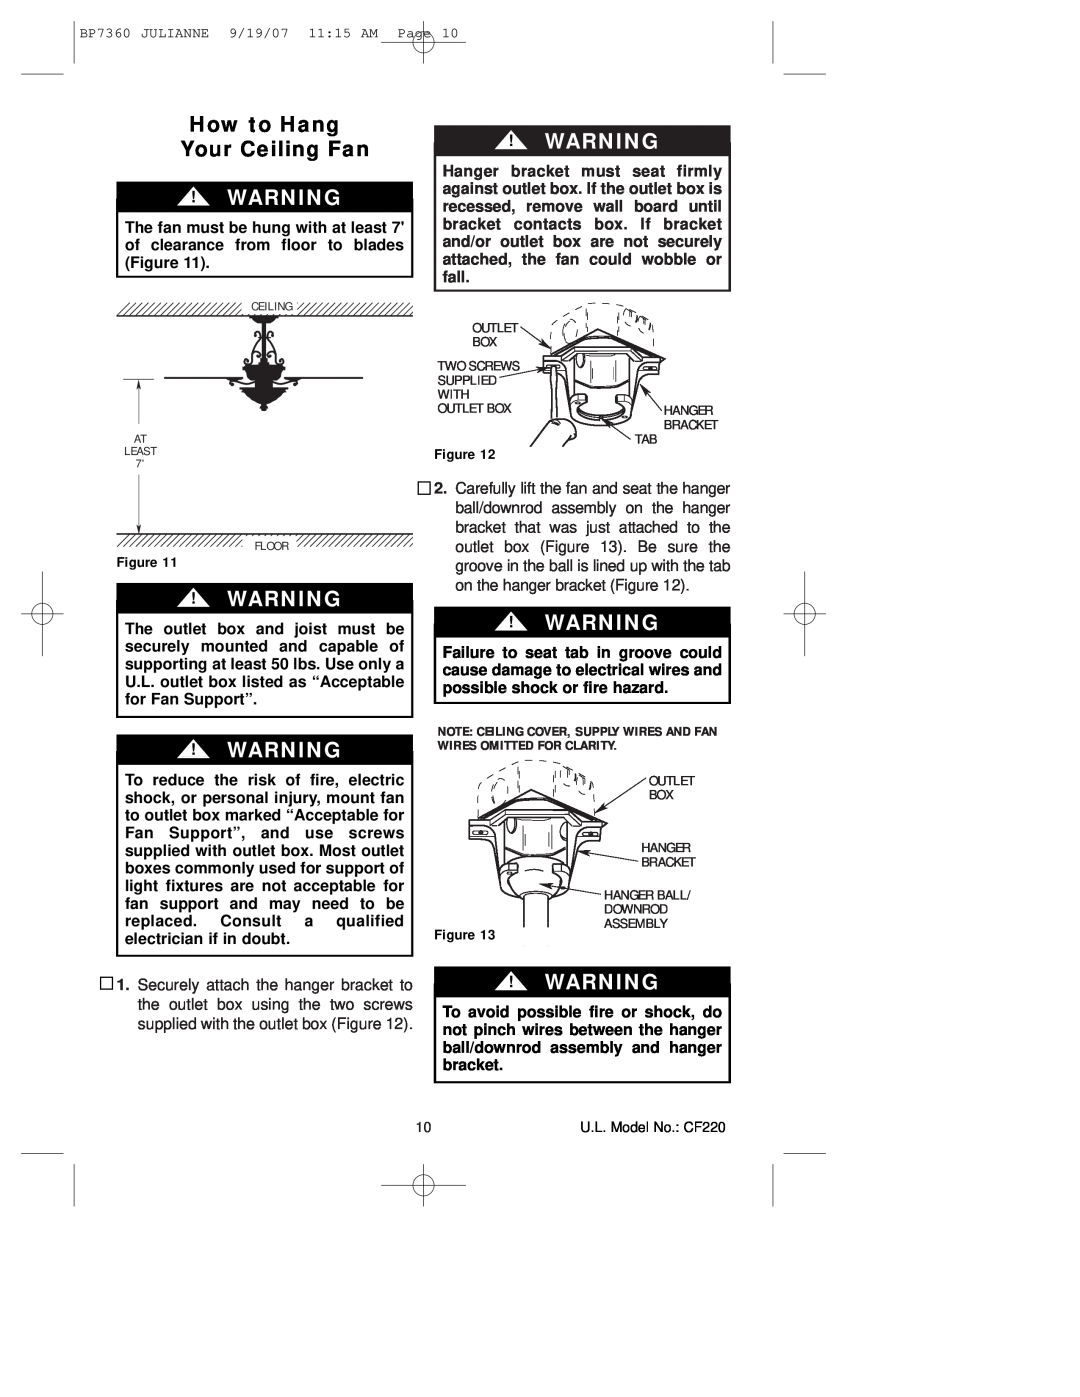 Emerson CF220GLZ00 How to Hang Your Ceiling Fan, Note Ceiling Cover, Supply Wires And Fan Wires Omitted For Clarity 